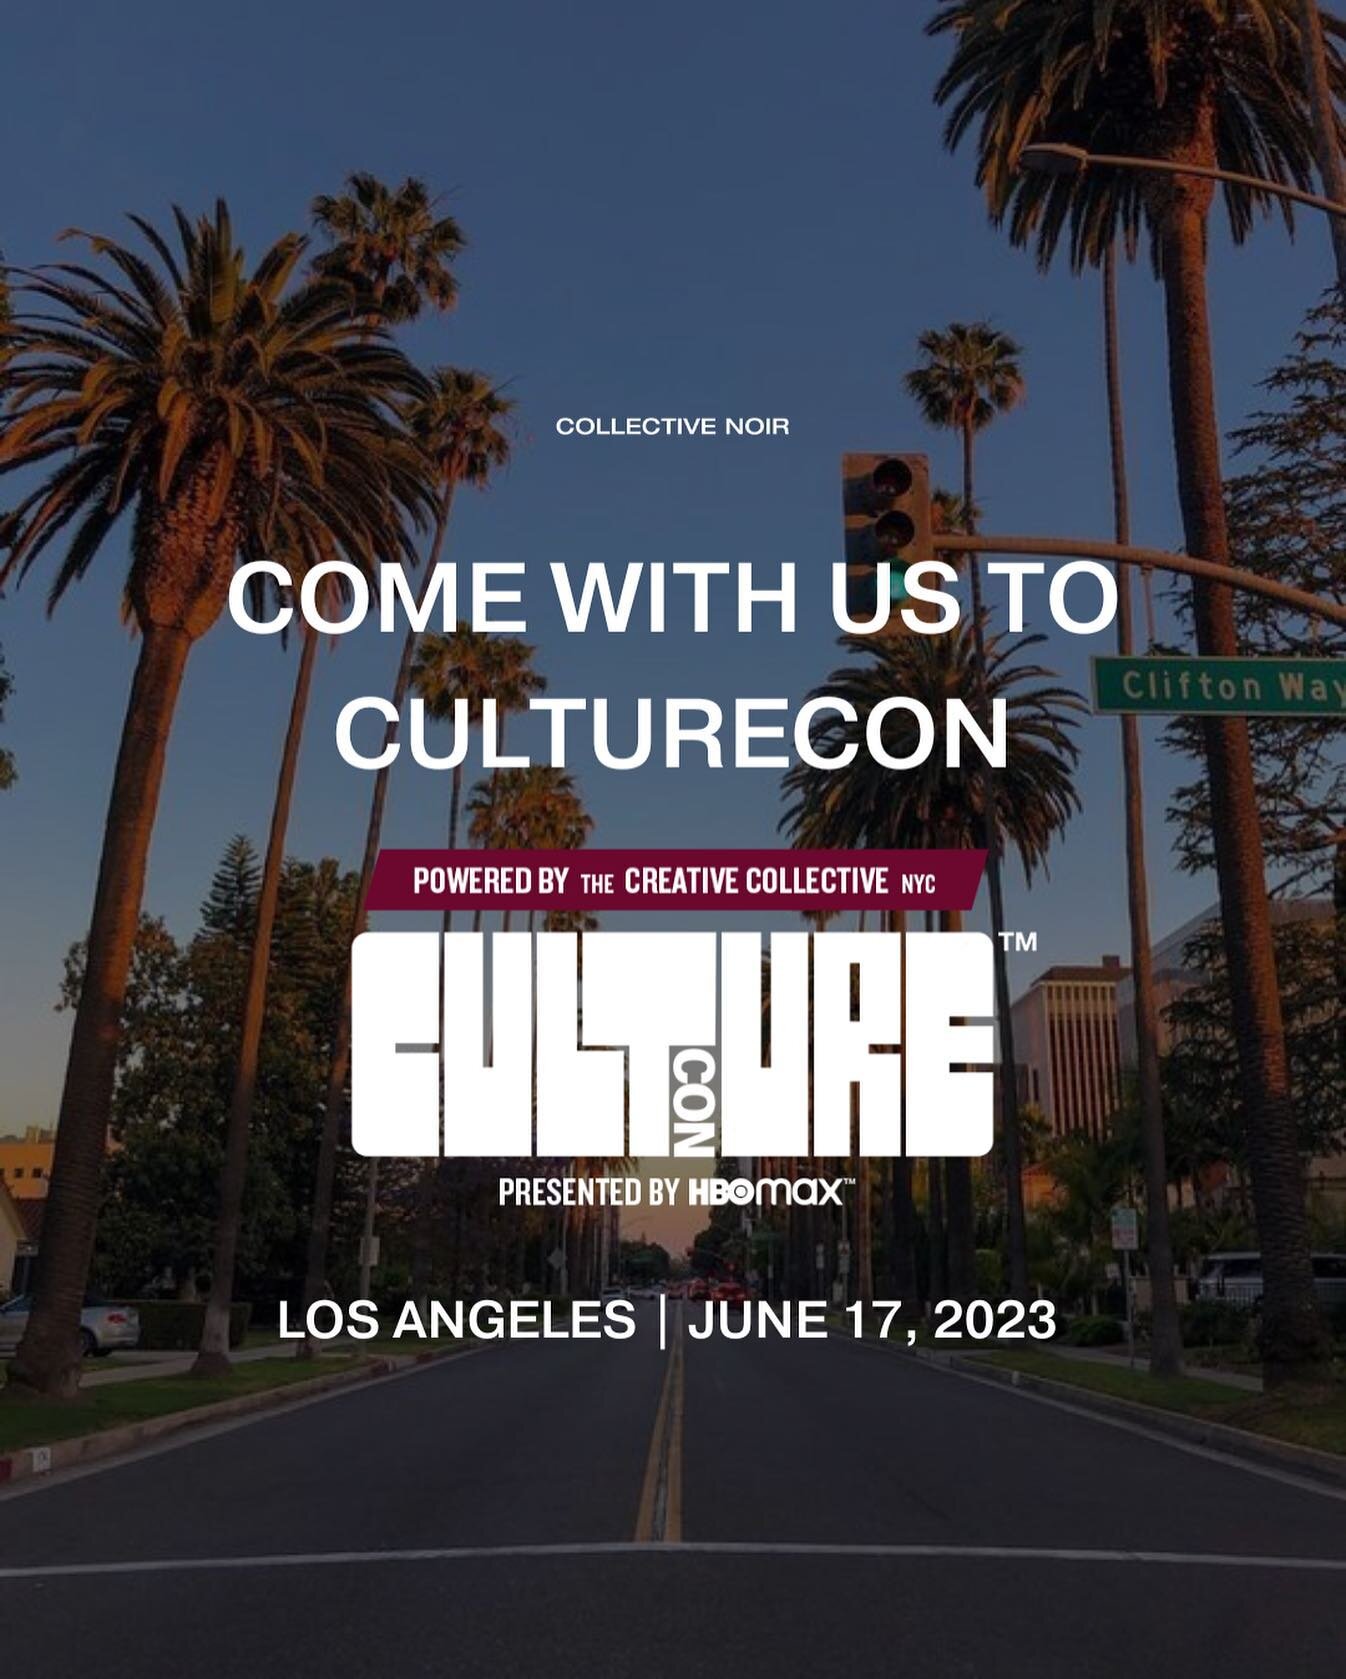 🌴 We&rsquo;re going to CultureCon LA, the biggest creative homecoming and want to bring you! We have partnered with CultureCon to give away (5) free tickets to CultureCon LA on June 17, 2023. 

To Enter The Giveaway: 
- you must be following @collec